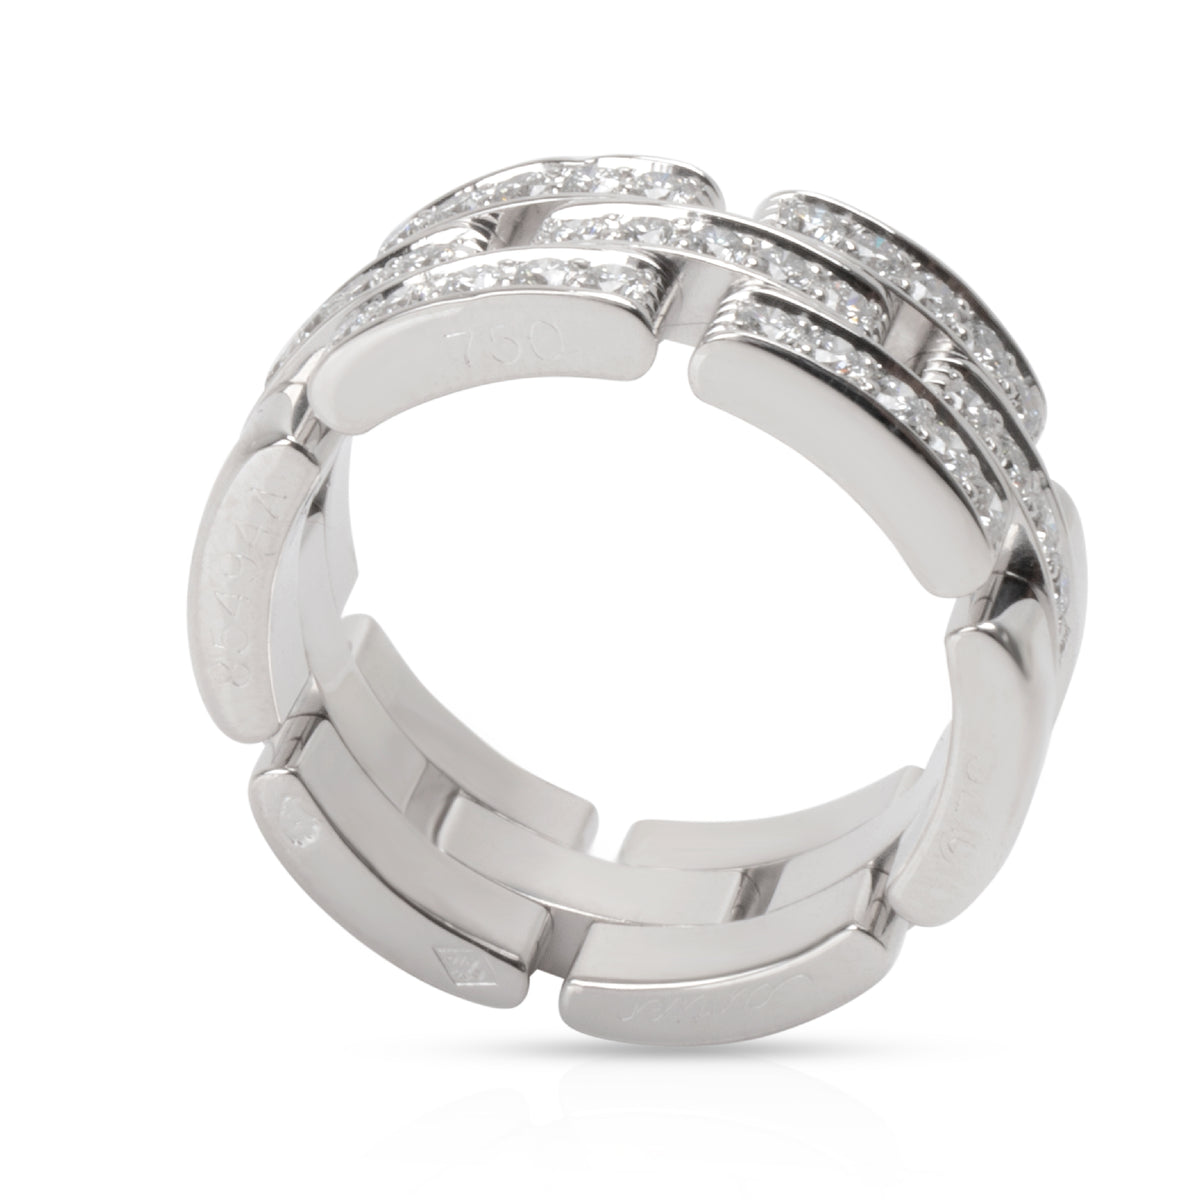 Cartier Maillon Panthere Diamond Band in 18K White Gold 0.5 CTW